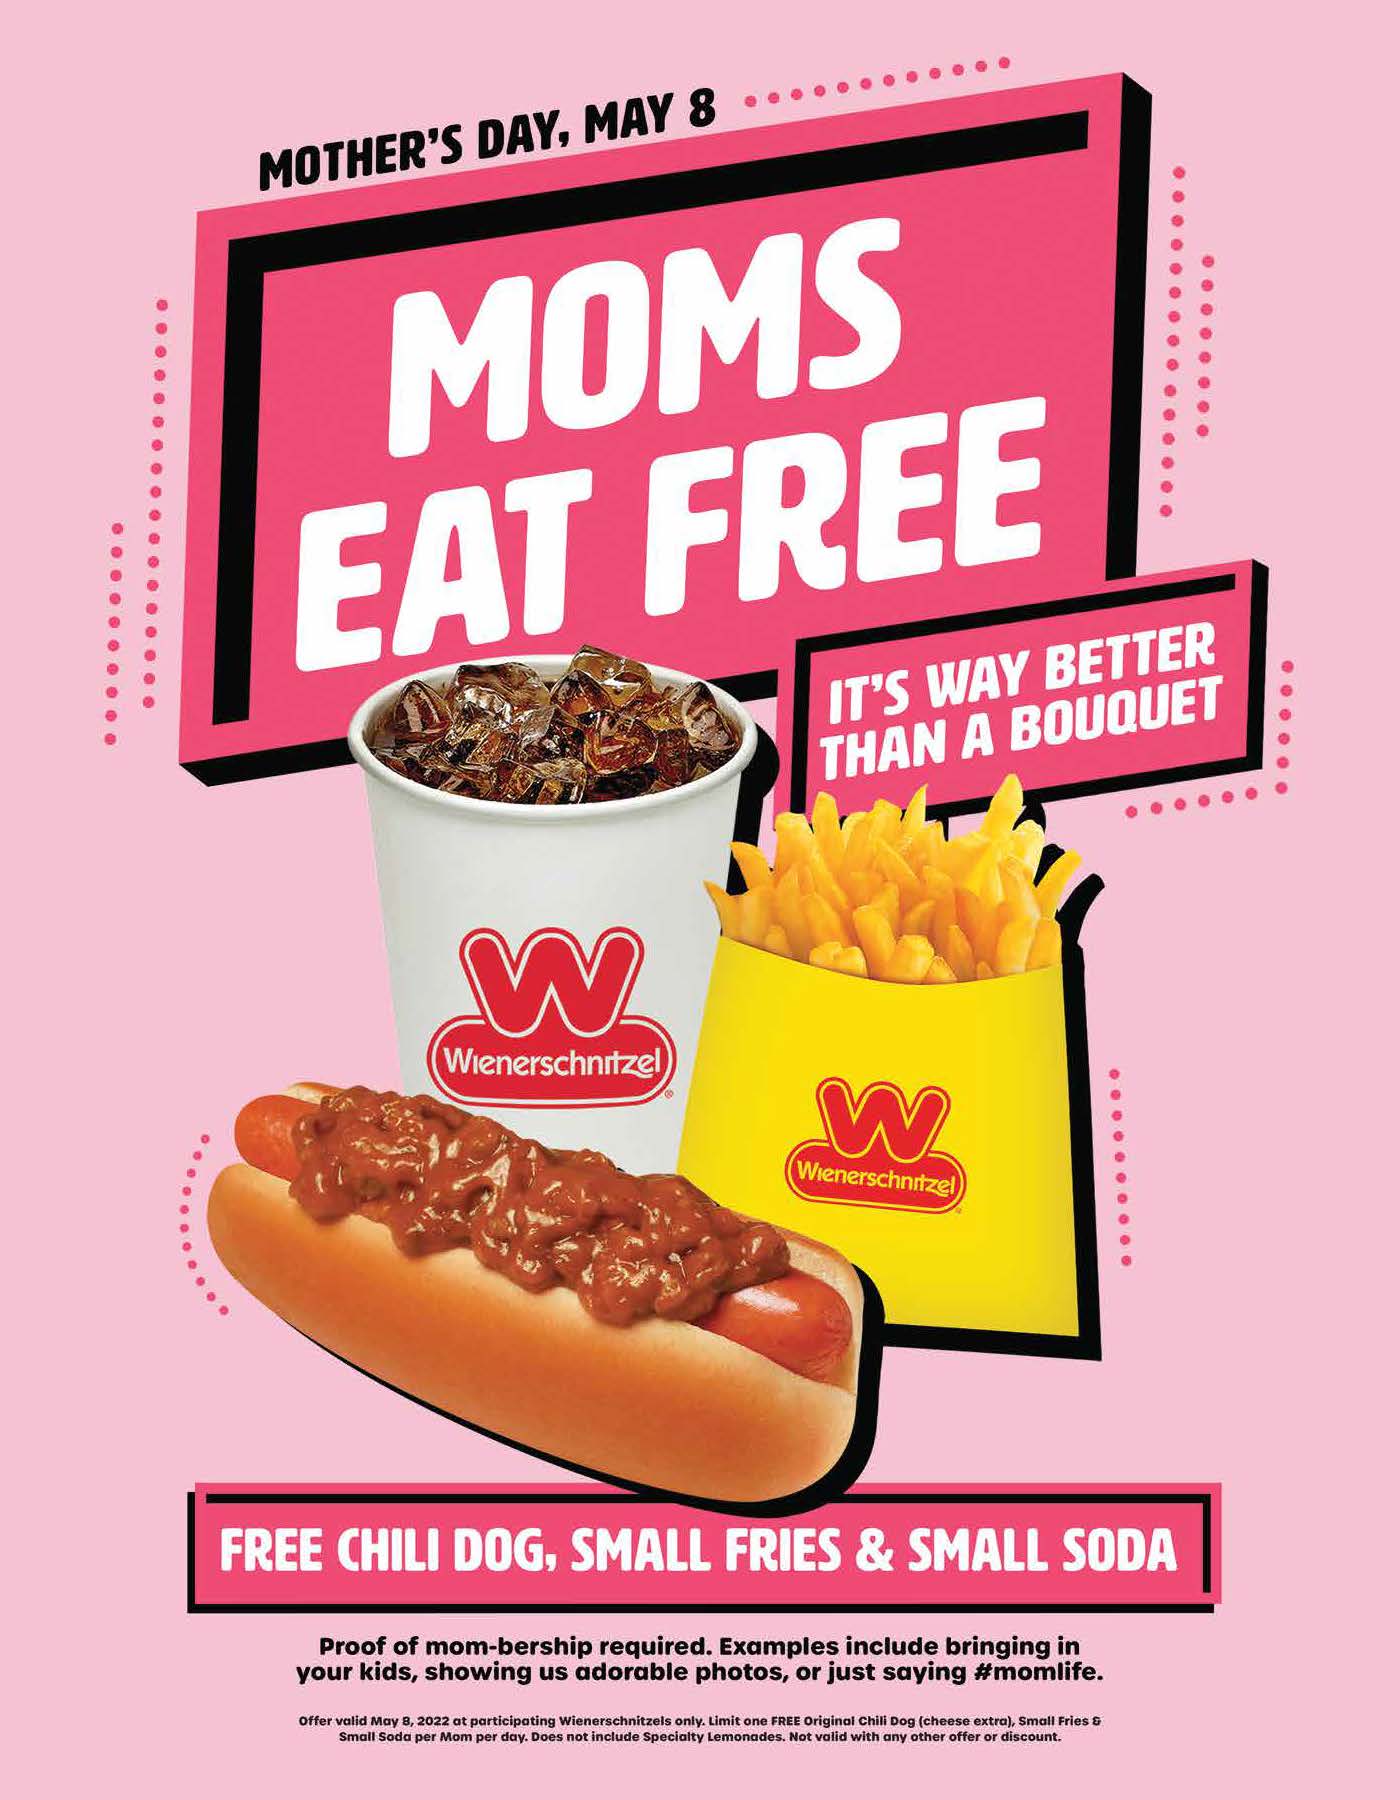 IN HONOR OF MOTHER’S DAY, WIENERSCHNITZEL TREATS MOMS TO A DELICIOUS FREE MEAL